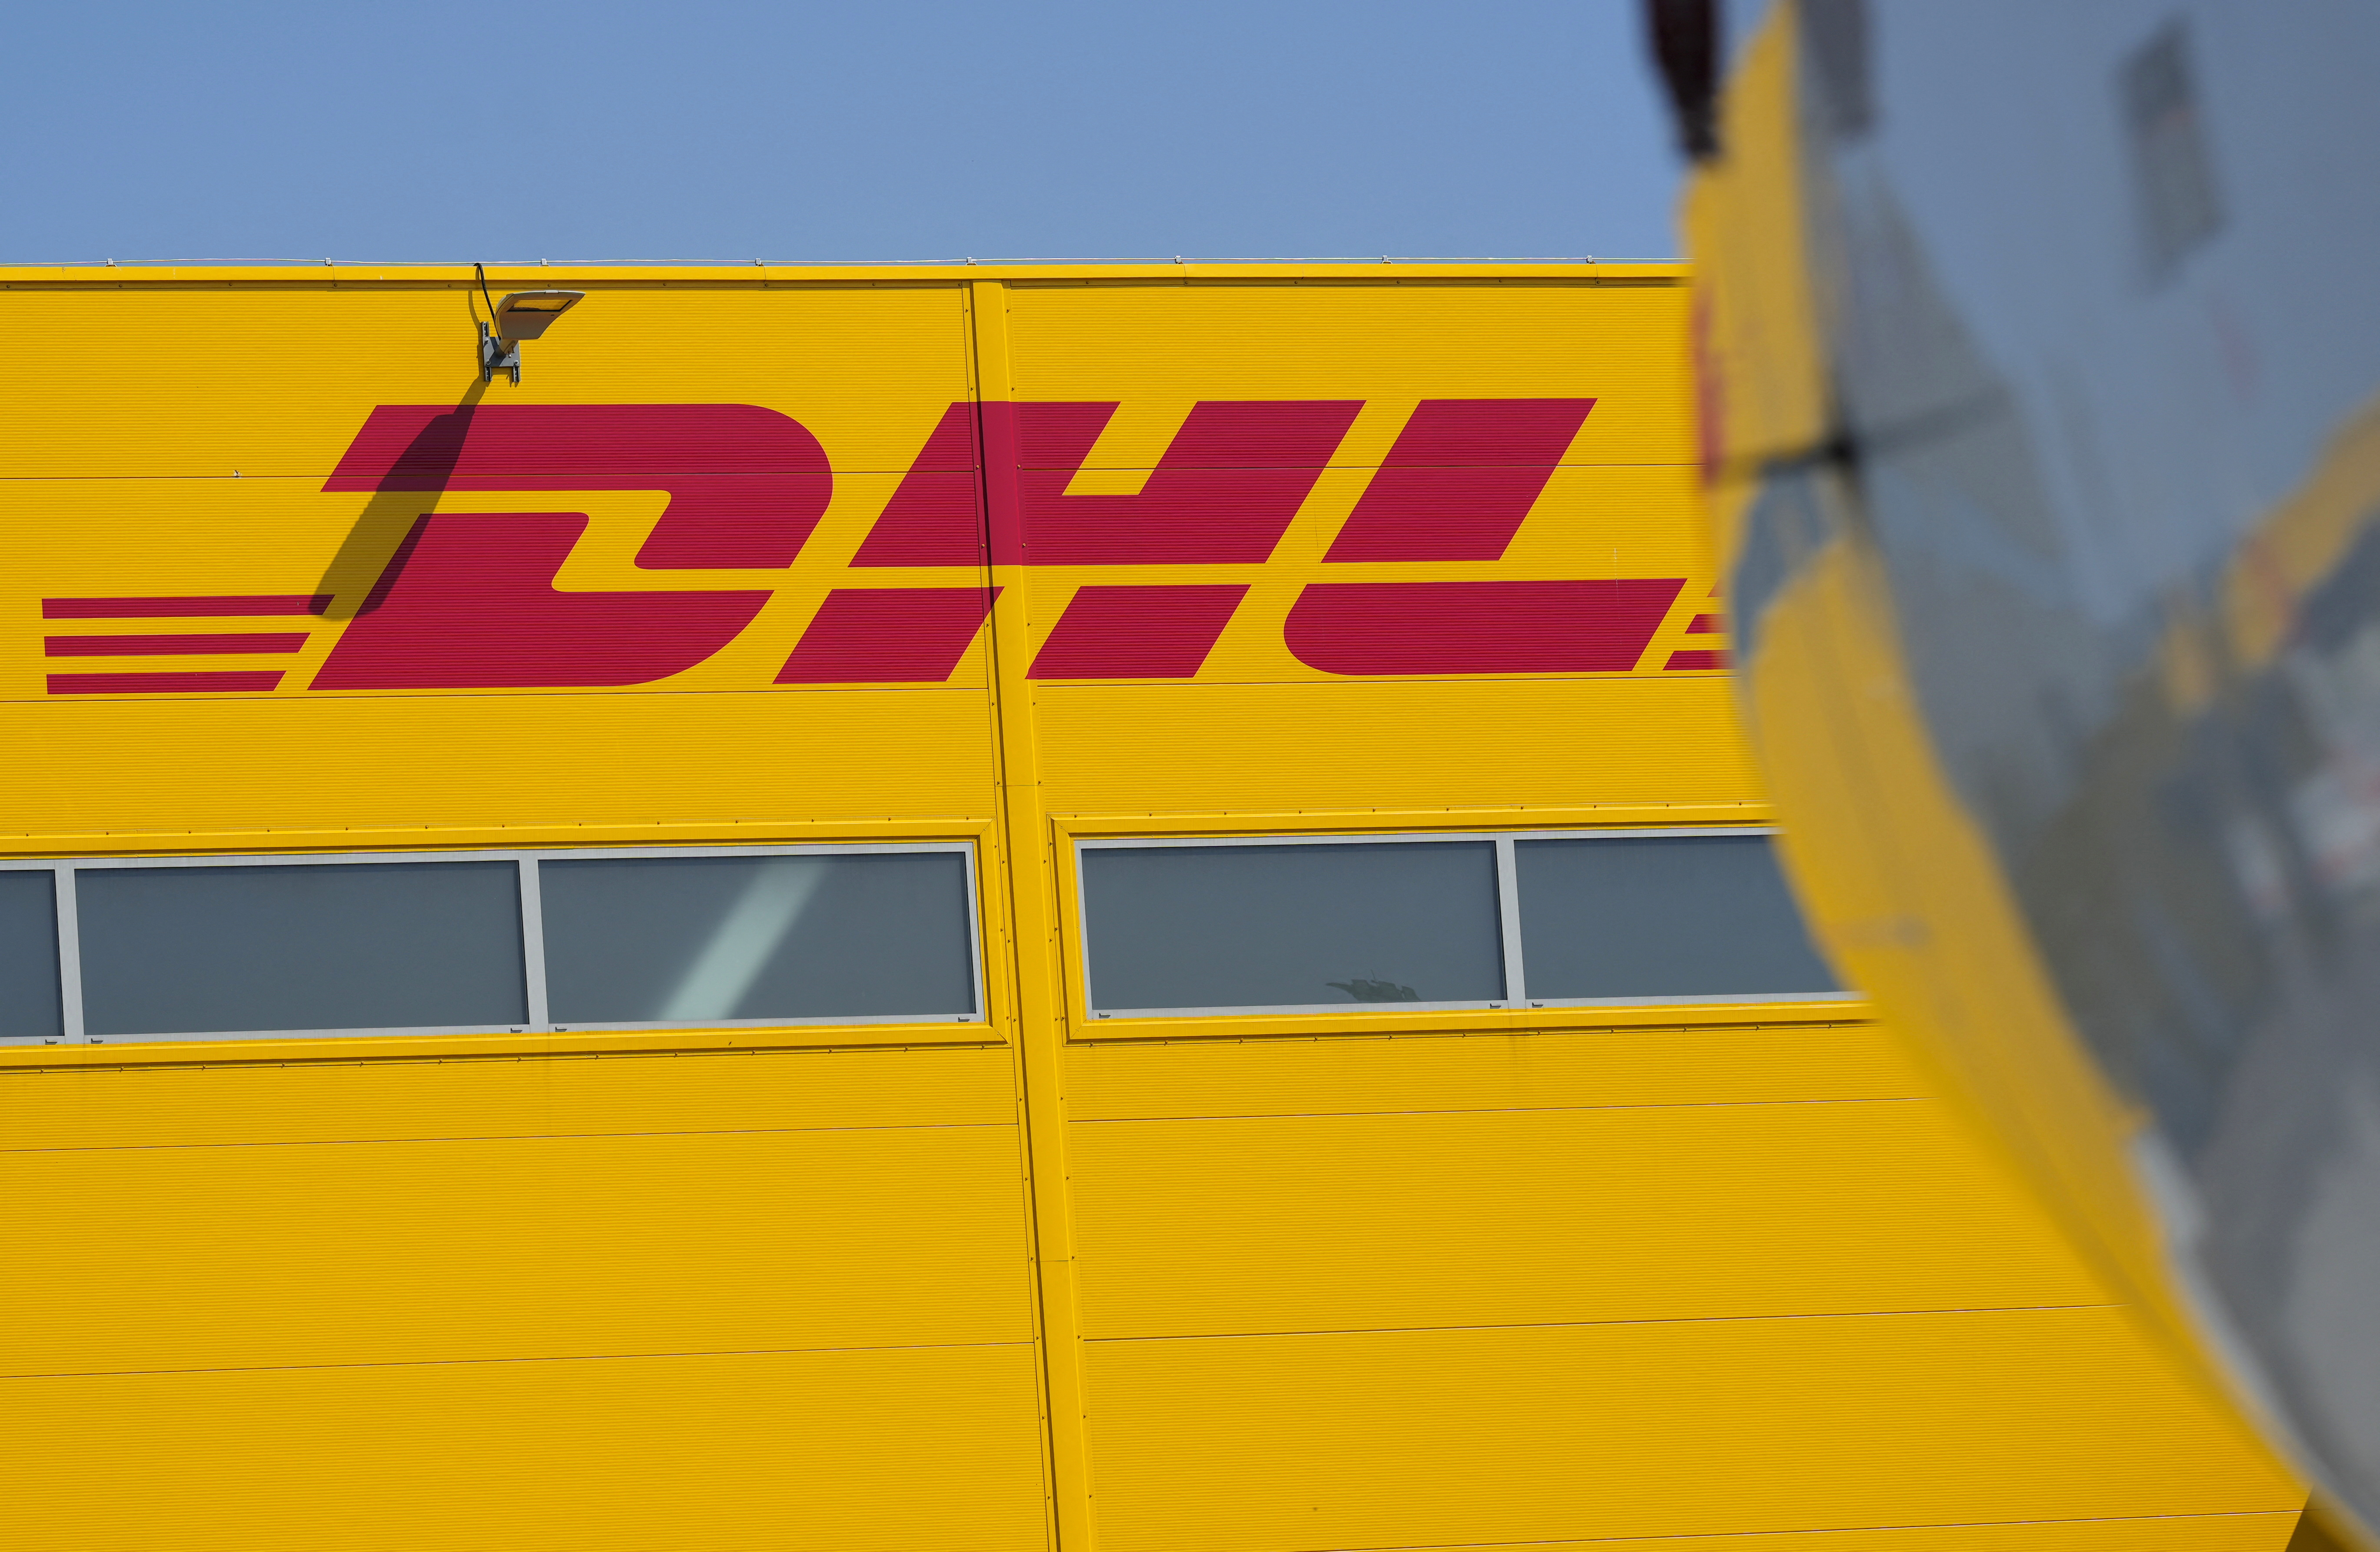 DHL sign is seen at Riga International Airport